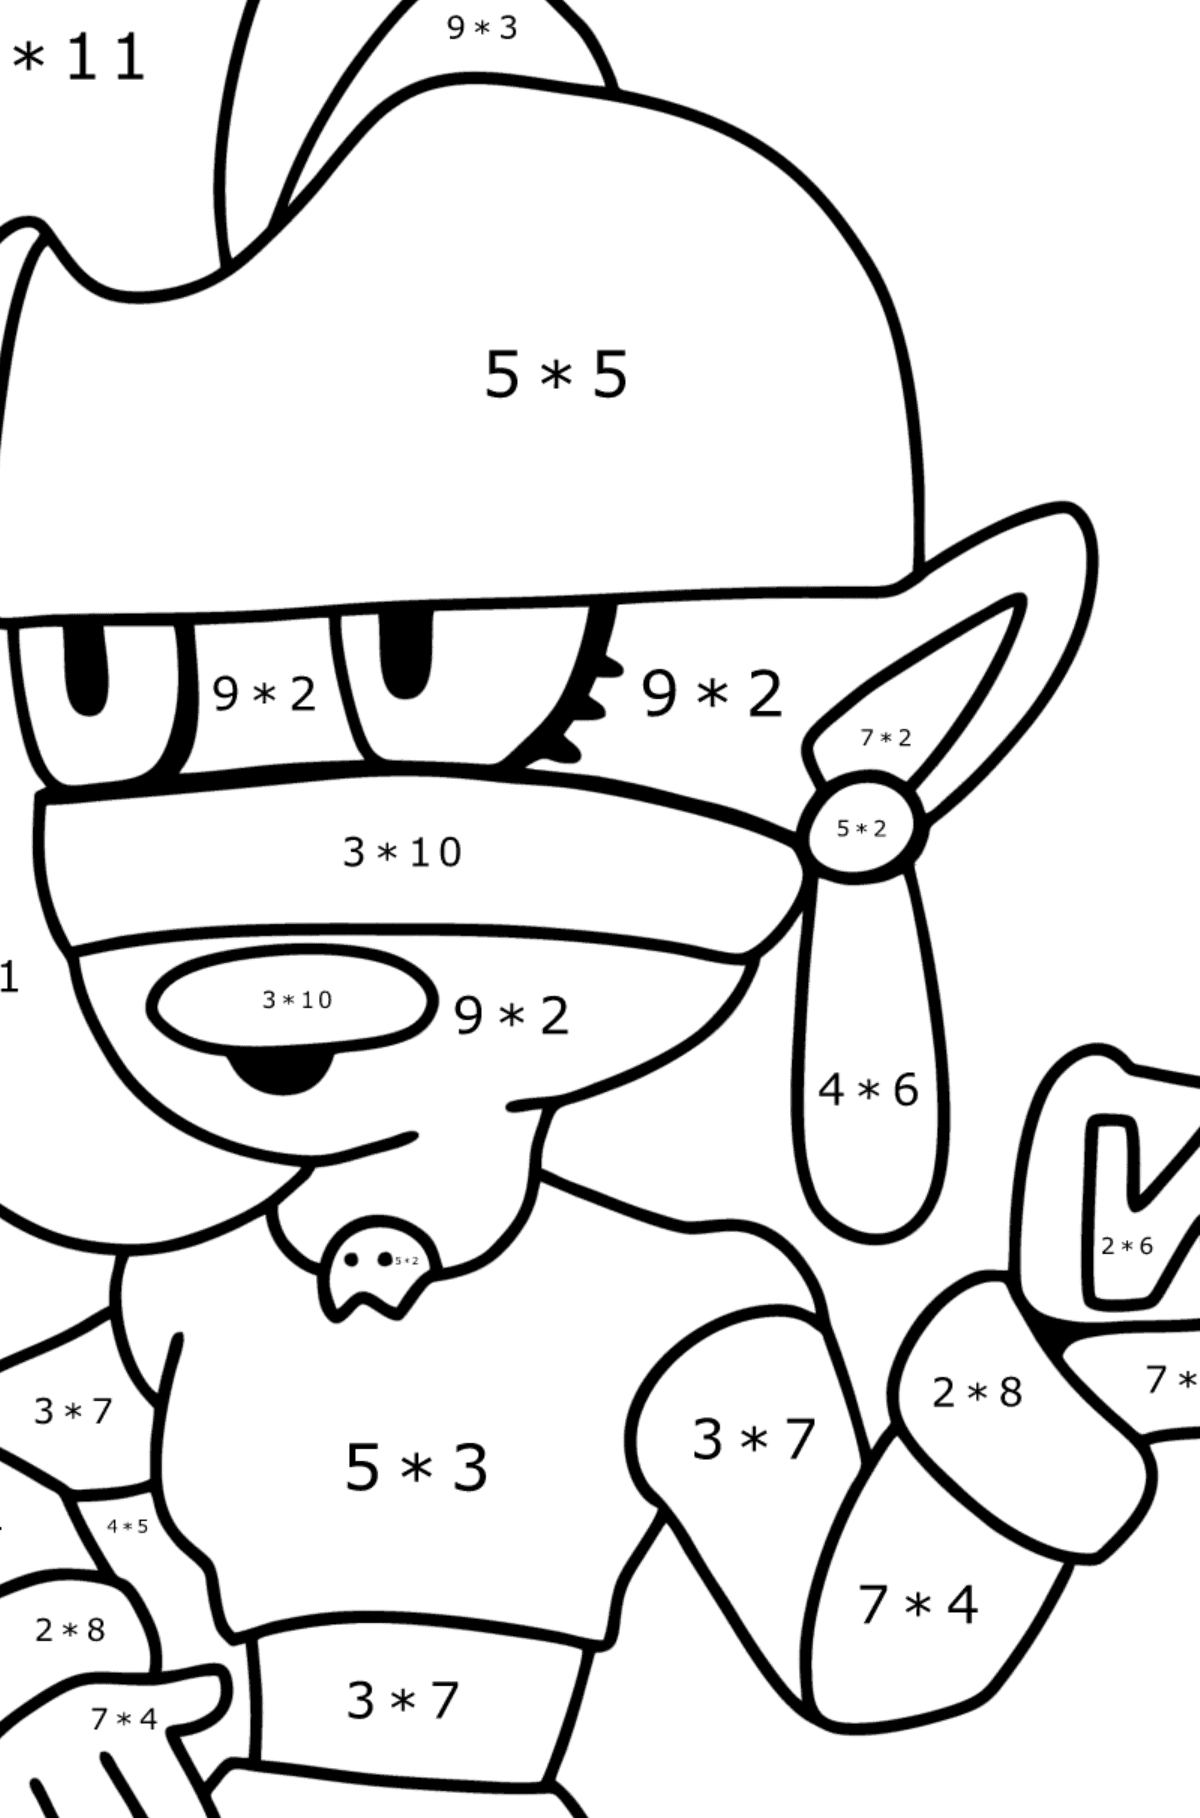 Brawl Stars Emz coloring page - Math Coloring - Multiplication for Kids